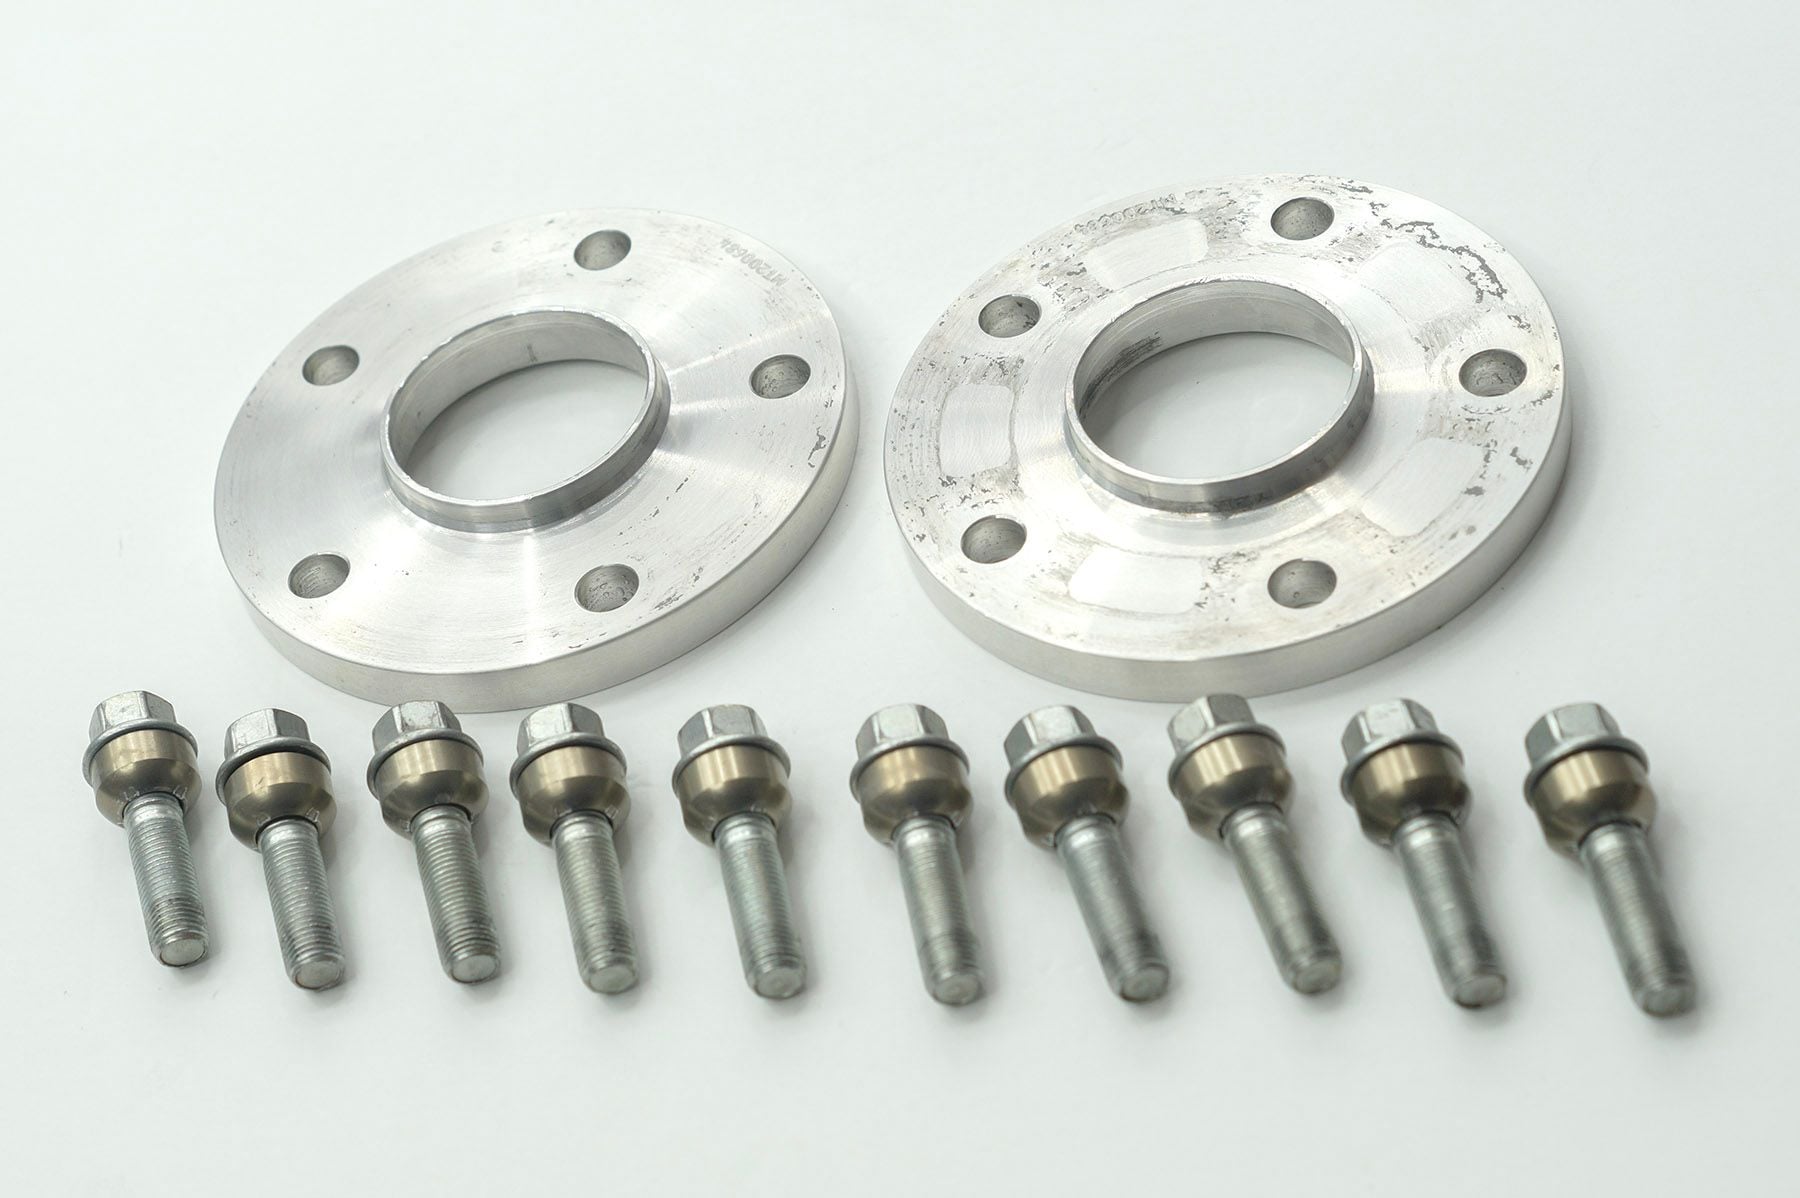 2006 Porsche 911 - 15MM Silver Hub Centric Wheel Spacers W/ Wheel Bolts - Accessories - $95 - Bayport, NY 11705, United States